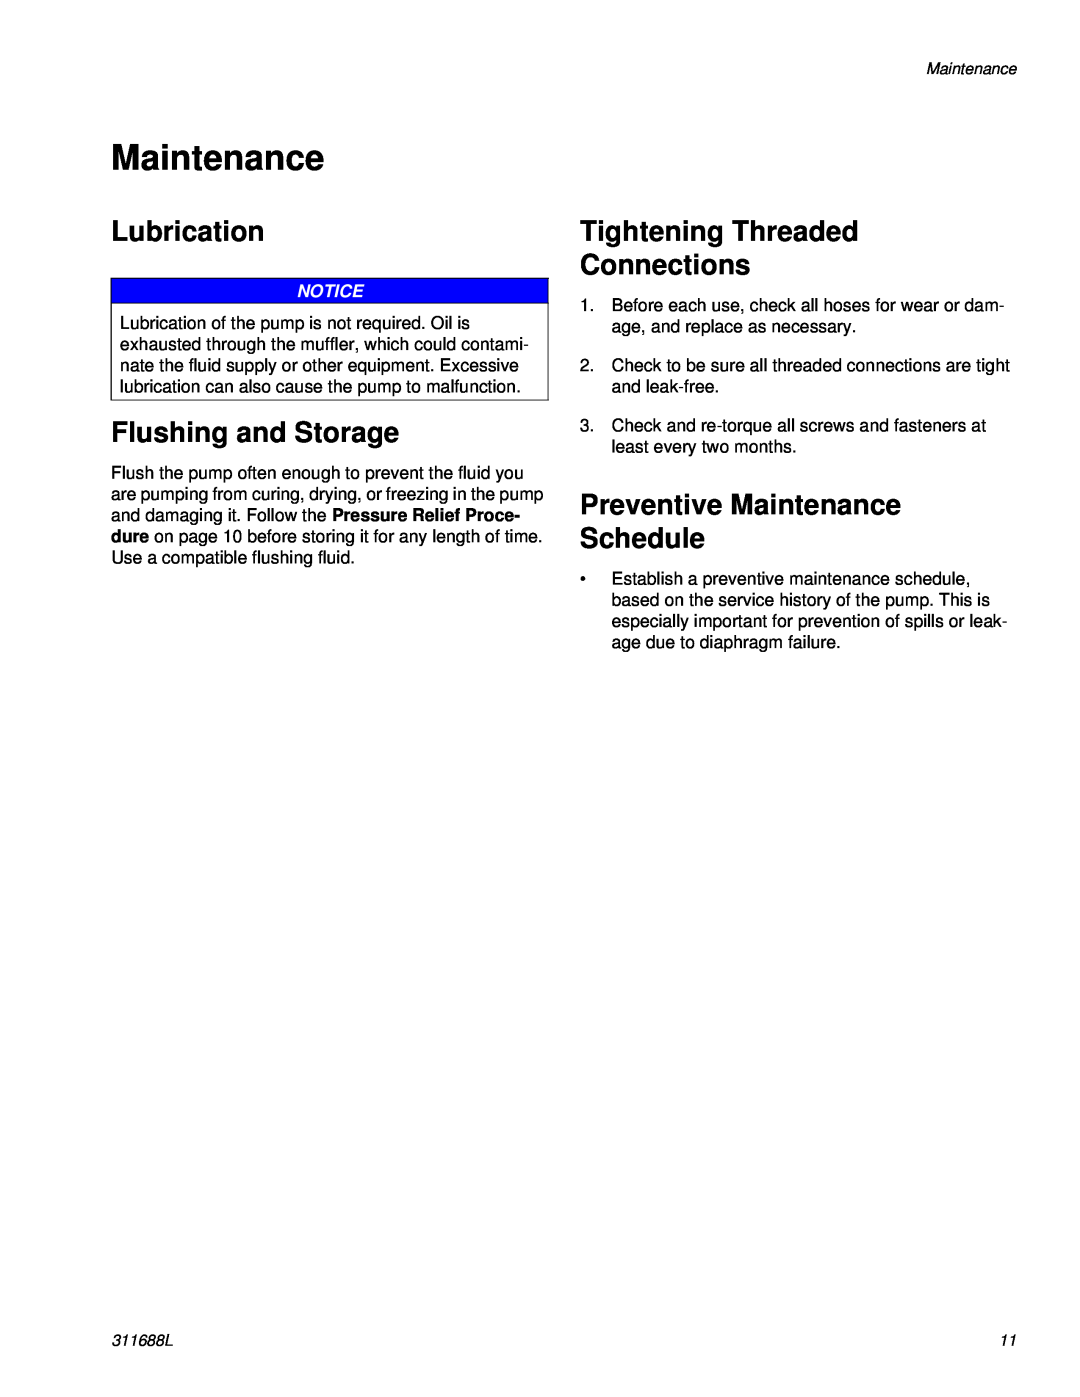 Graco 311688L important safety instructions Maintenance, Lubrication, Flushing and Storage, Tightening Threaded Connections 